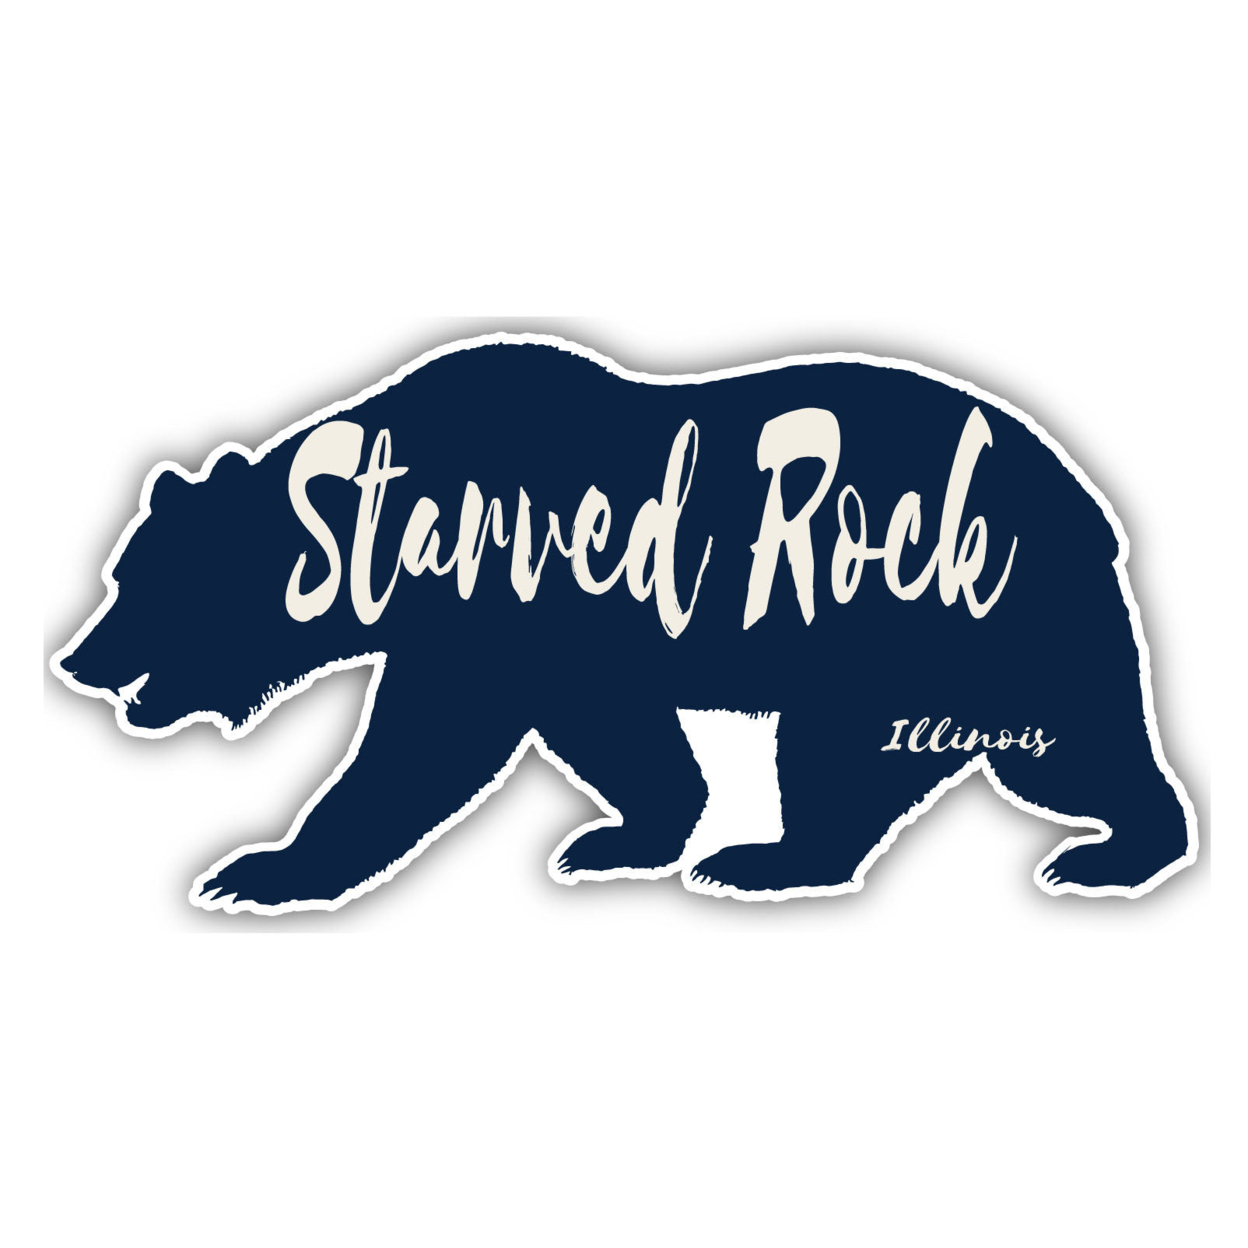 Starved Rock Illinois Souvenir Decorative Stickers (Choose Theme And Size) - Single Unit, 2-Inch, Great Outdoors